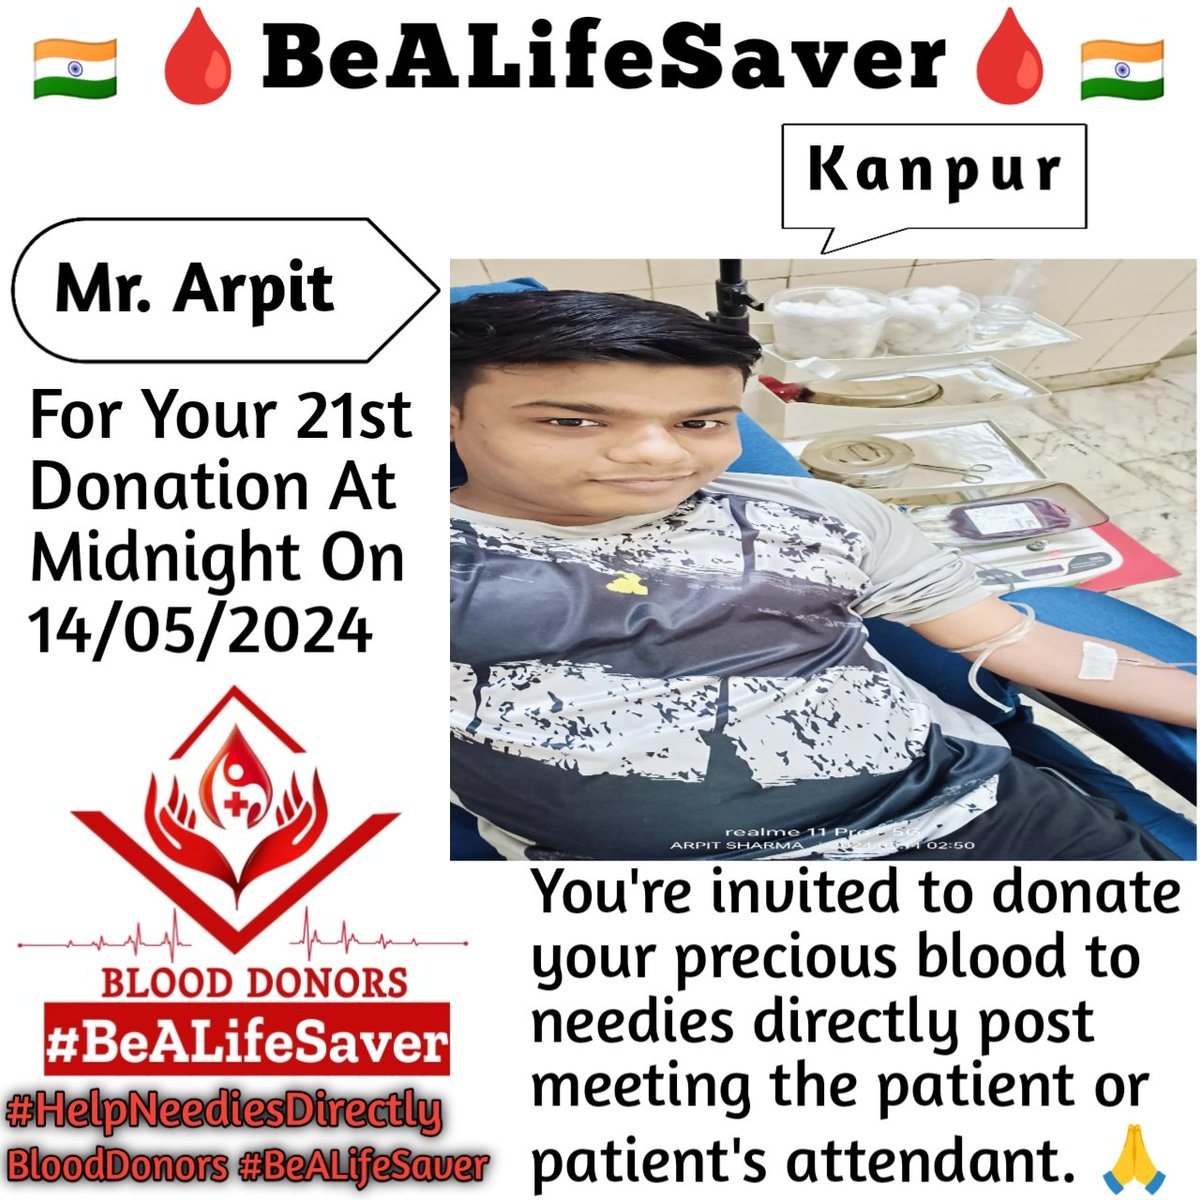 Kanpur BeALifeSaver
Kudos_Mr_Arpit_Ji
#HelpNeediesDirectly

Today's hero
Mr. Arpit Ji donated blood At Midnight in Kanpur for the 21st Time for one of the needies. Heartfelt Gratitude and Respect to Arpit Ji for his blood donation for Patient admitted in Kanpur.